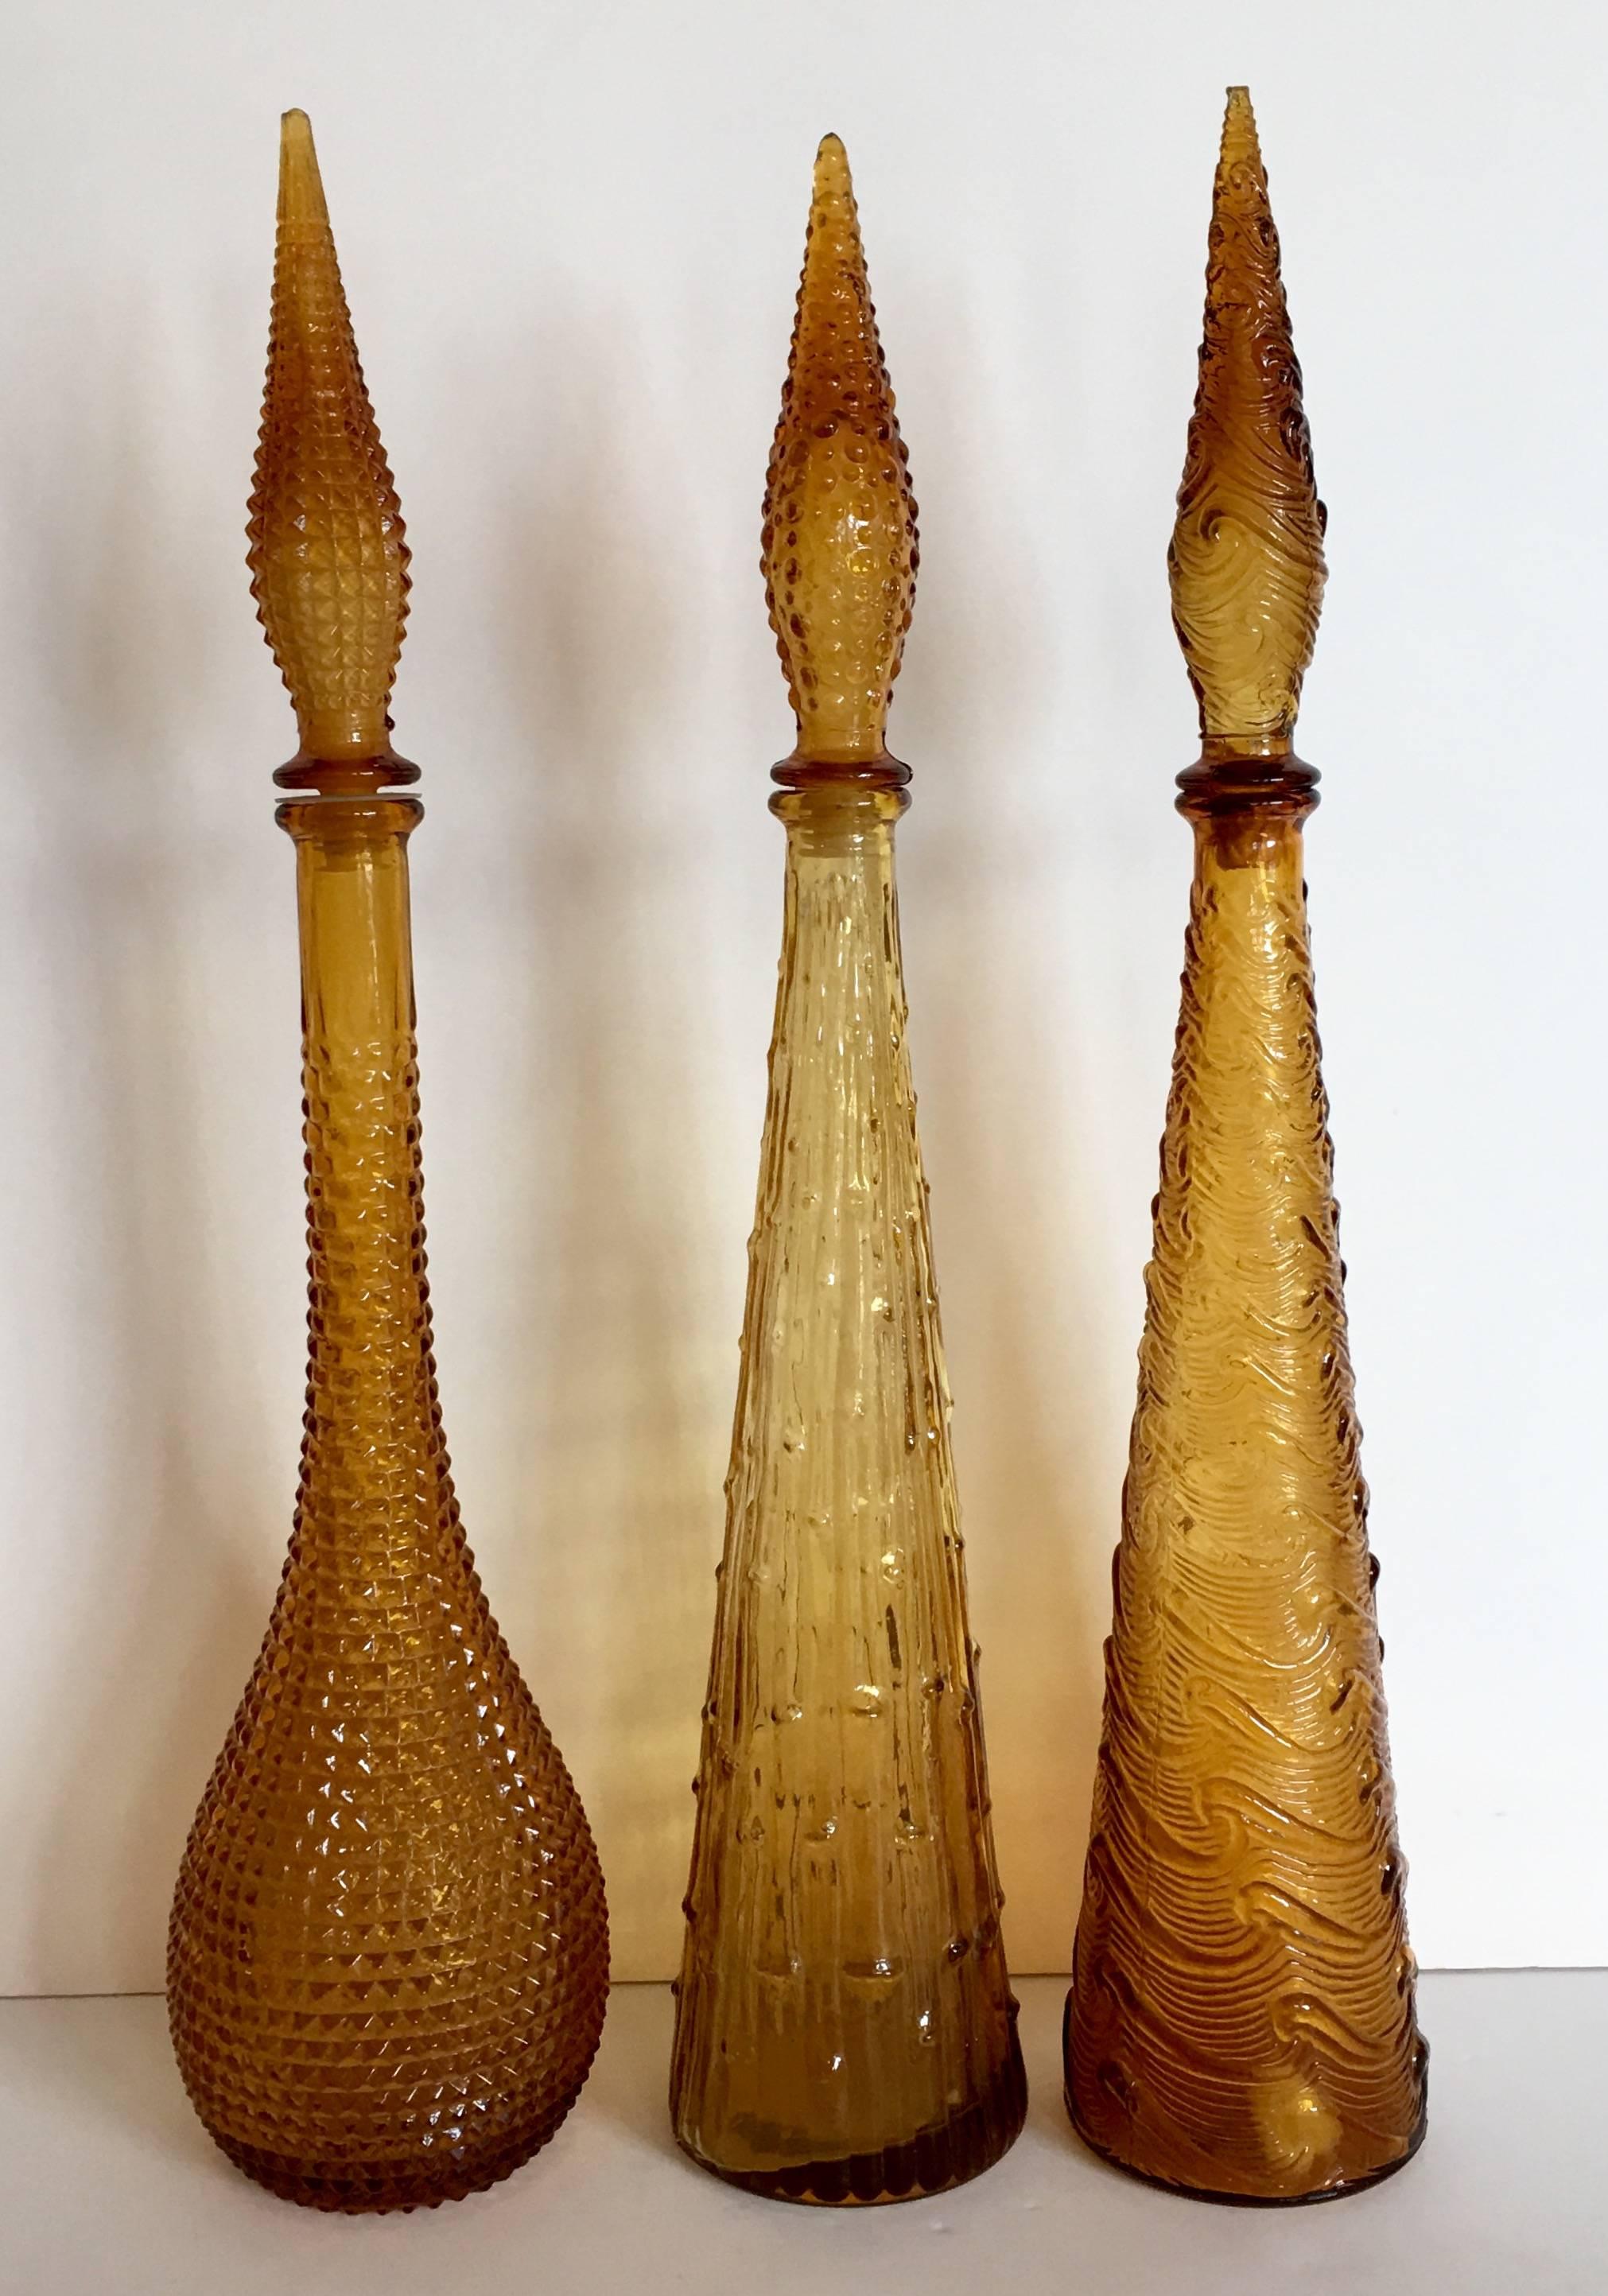 Set of three amber textured Italian Empoli glass decanters. Each one has a different pattern and all are signed Italy on the underside. Set includes one faceted pattern, one faux bamboo pattern 22.25" height x 4.25" diameter and one wave